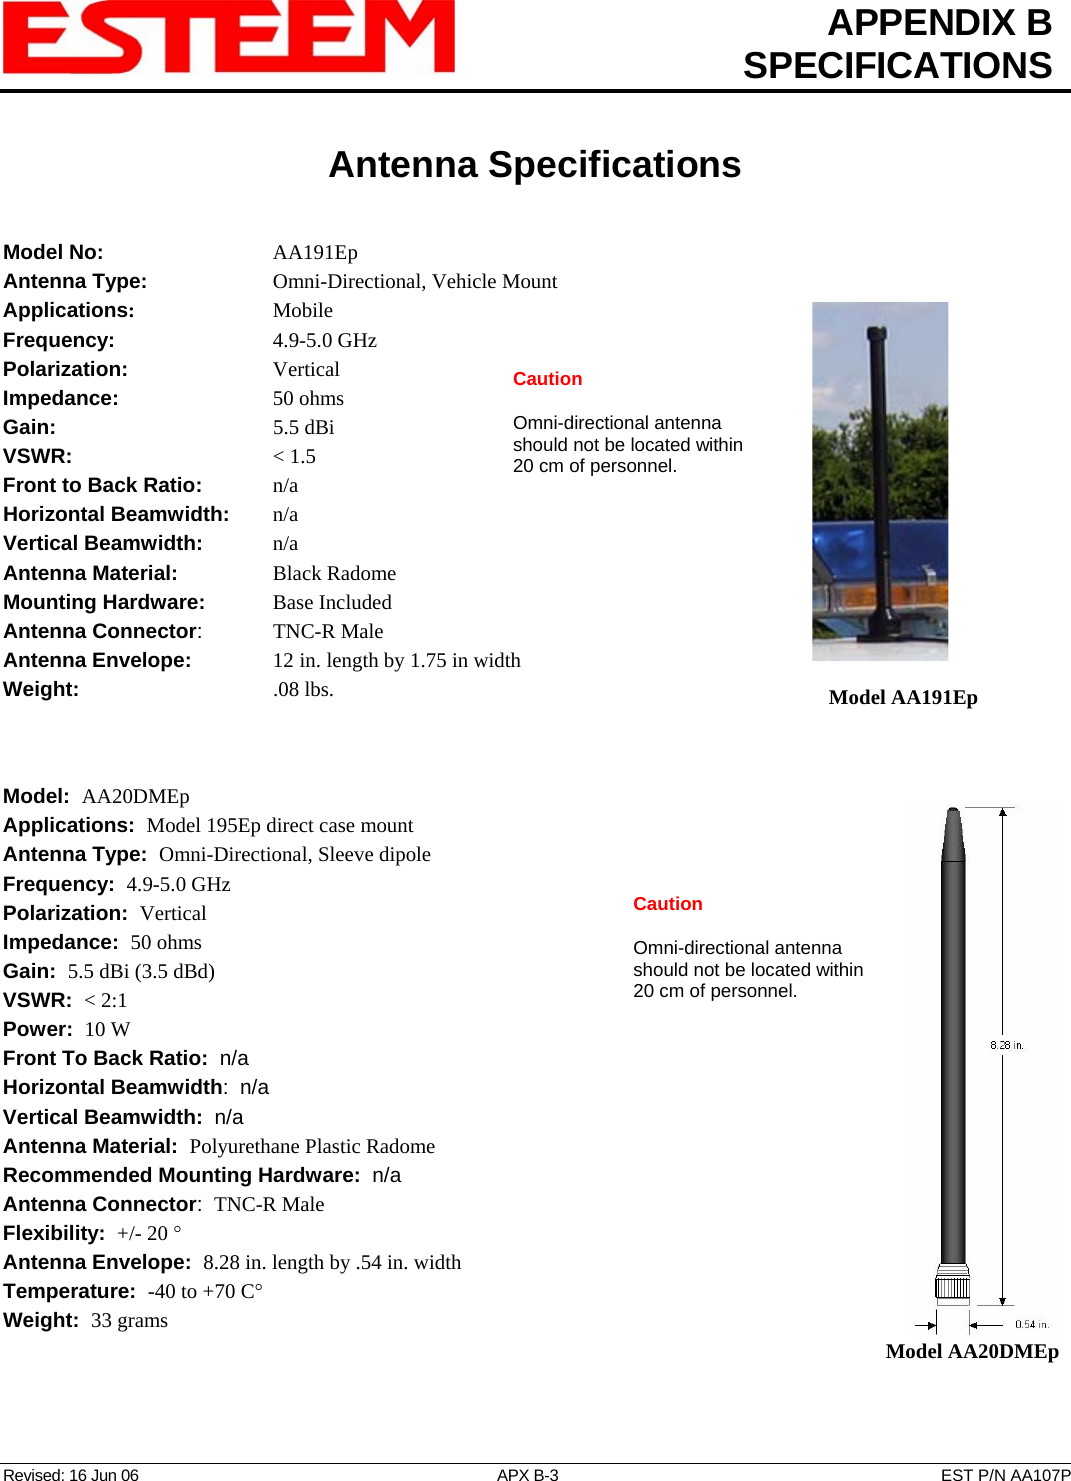  APPENDIX B  SPECIFICATIONS   Antenna Specifications   Revised: 16 Jun 06  APX B-3  EST P/N AA107P Model No:    AA191Ep Antenna Type:   Omni-Directional, Vehicle Mount Applications:    Mobile   Model AA191Ep Frequency:    4.9-5.0 GHz Polarization:    Vertical  Caution  Omni-directional antenna should not be located within 20 cm of personnel. Impedance:    50 ohms Gain:     5.5 dBi VSWR:      &lt; 1.5  Front to Back Ratio:   n/a Horizontal Beamwidth:  n/a Vertical Beamwidth:     n/a Antenna Material:   Black Radome  Mounting Hardware:    Base Included  Antenna Connector:   TNC-R Male Antenna Envelope:   12 in. length by 1.75 in width Weight:       .08 lbs.     Model:  AA20DMEp   Model AA20DMEp Applications:  Model 195Ep direct case mount Antenna Type:  Omni-Directional, Sleeve dipole Frequency:  4.9-5.0 GHz Caution  Omni-directional antenna should not be located within 20 cm of personnel. Polarization:  Vertical Impedance:  50 ohms Gain:  5.5 dBi (3.5 dBd) VSWR:  &lt; 2:1  Power:  10 W  Front To Back Ratio:  n/a Horizontal Beamwidth:  n/a Vertical Beamwidth:  n/a Antenna Material:  Polyurethane Plastic Radome  Recommended Mounting Hardware:  n/a Antenna Connector:  TNC-R Male  Flexibility:  +/- 20 °  Antenna Envelope:  8.28 in. length by .54 in. width Temperature:  -40 to +70 C°  Weight:  33 grams  